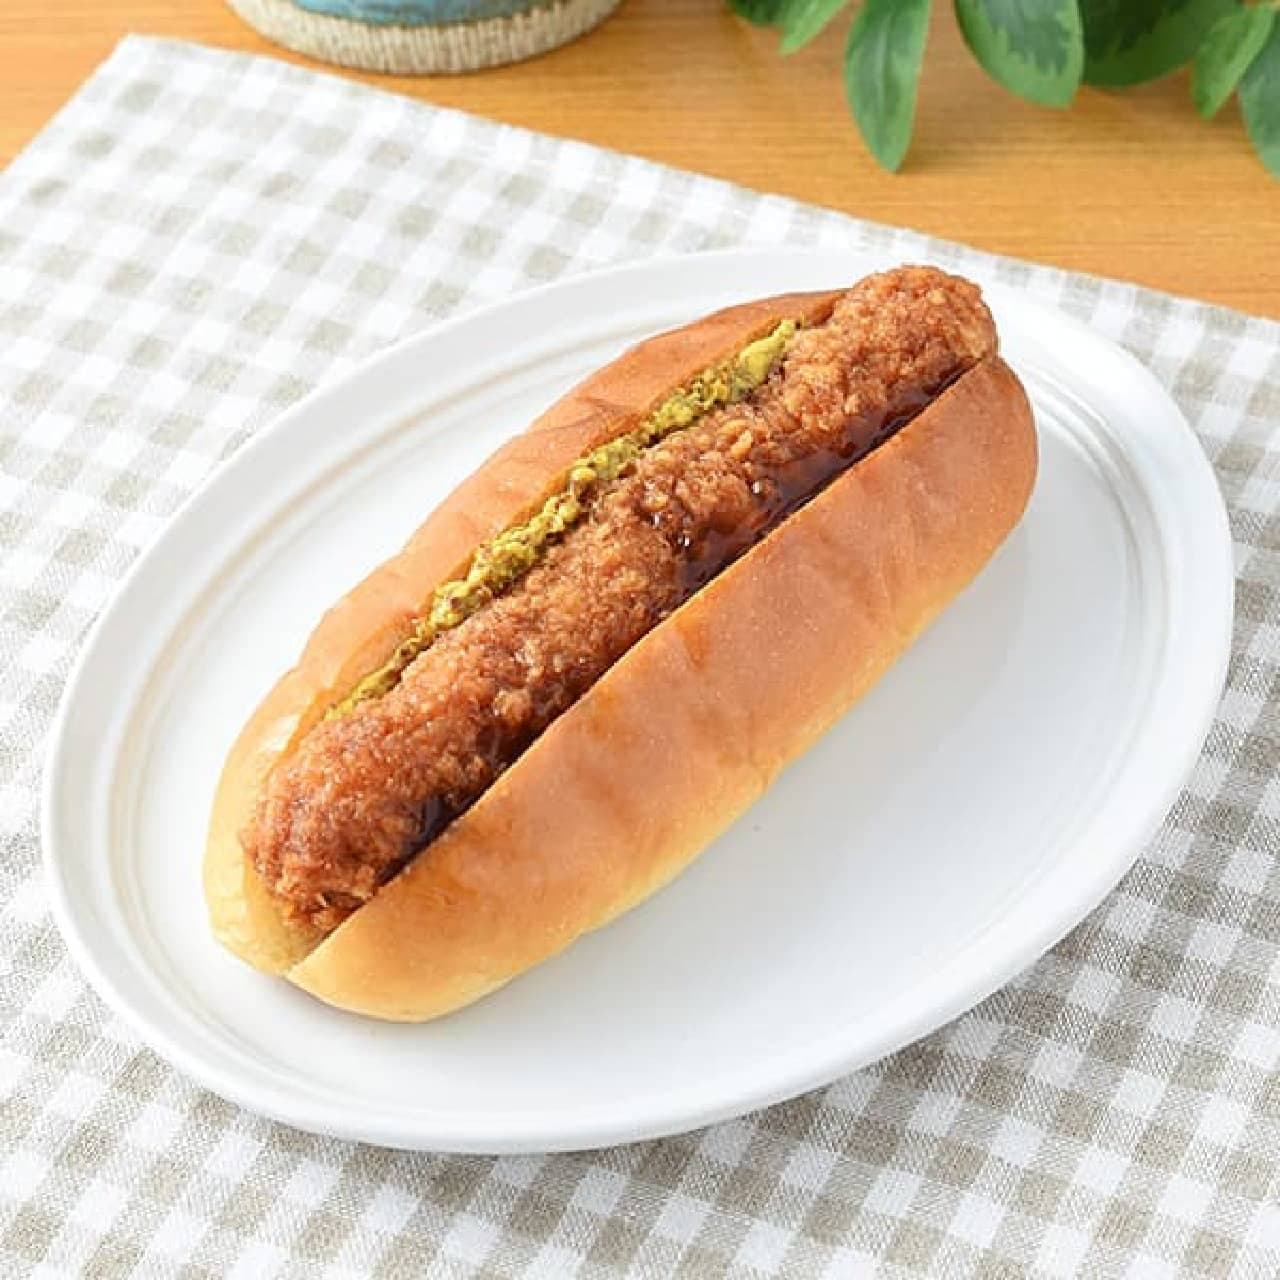 FamilyMart "Fresh Copped Bread (Sausage Cutlet)